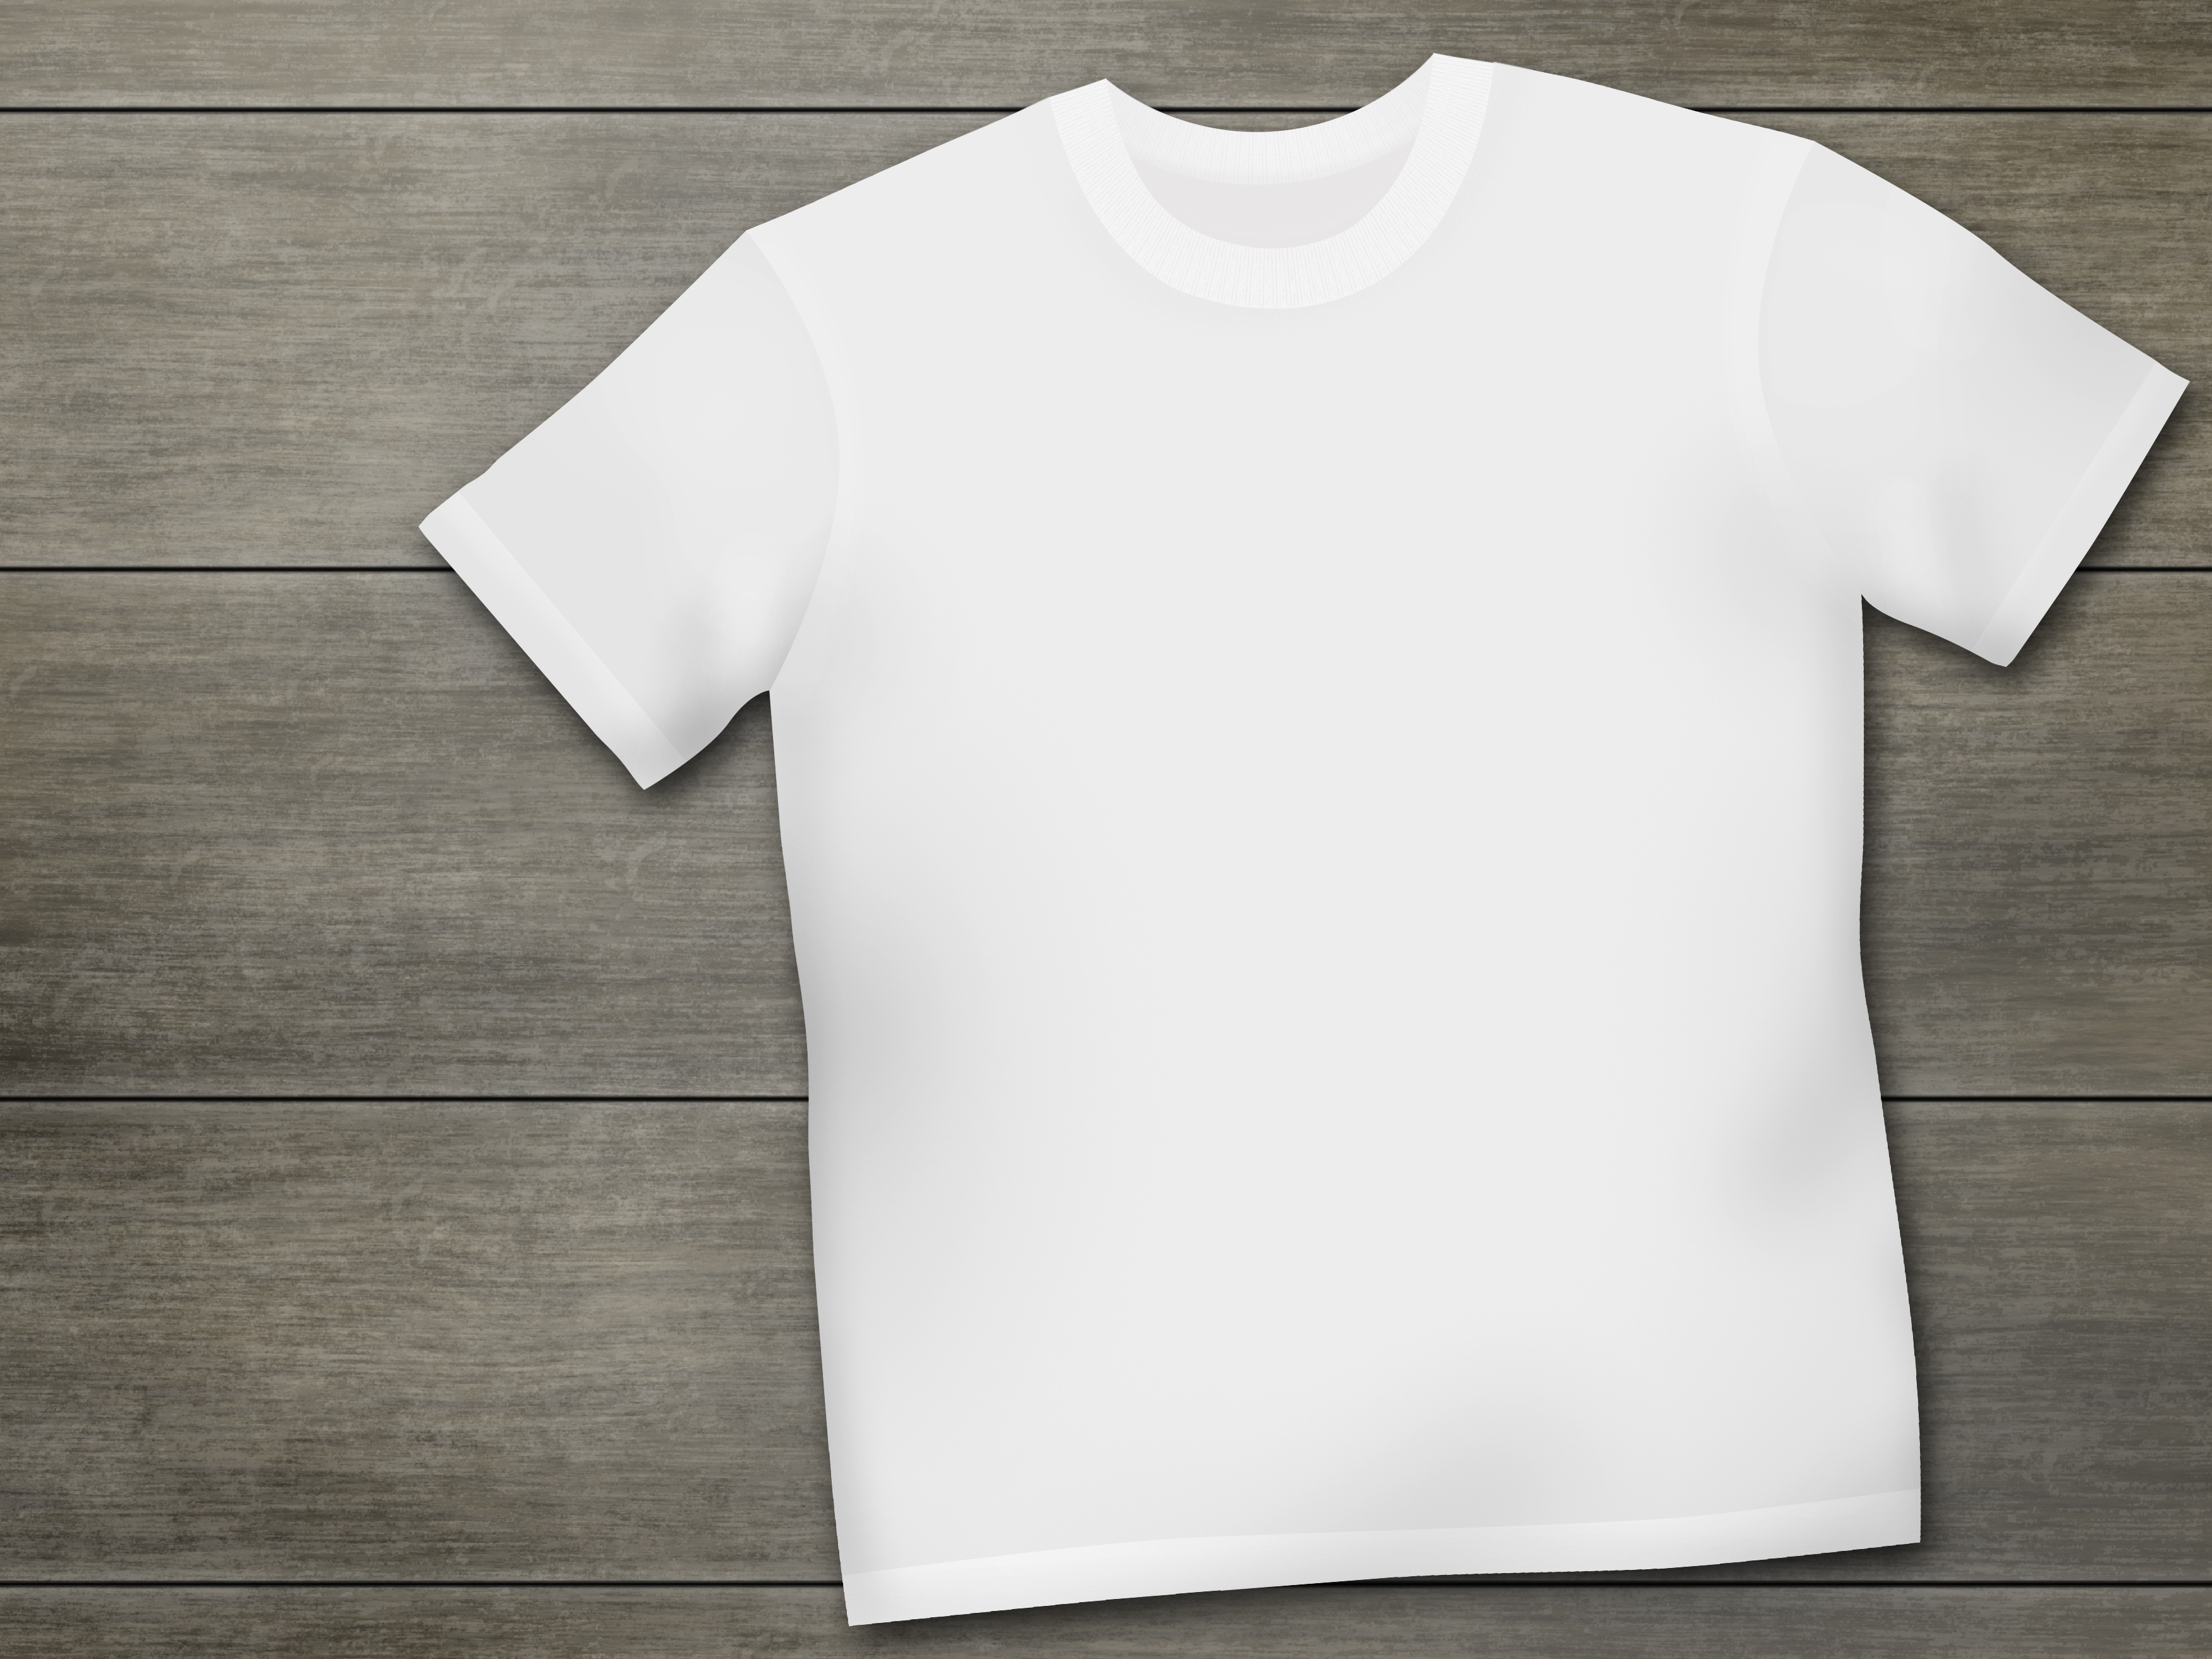 Download White T-Shirt Baby Look Mockup Free - Blank White Tshirt Mockup On Wooden Hanger Front And Rear ...